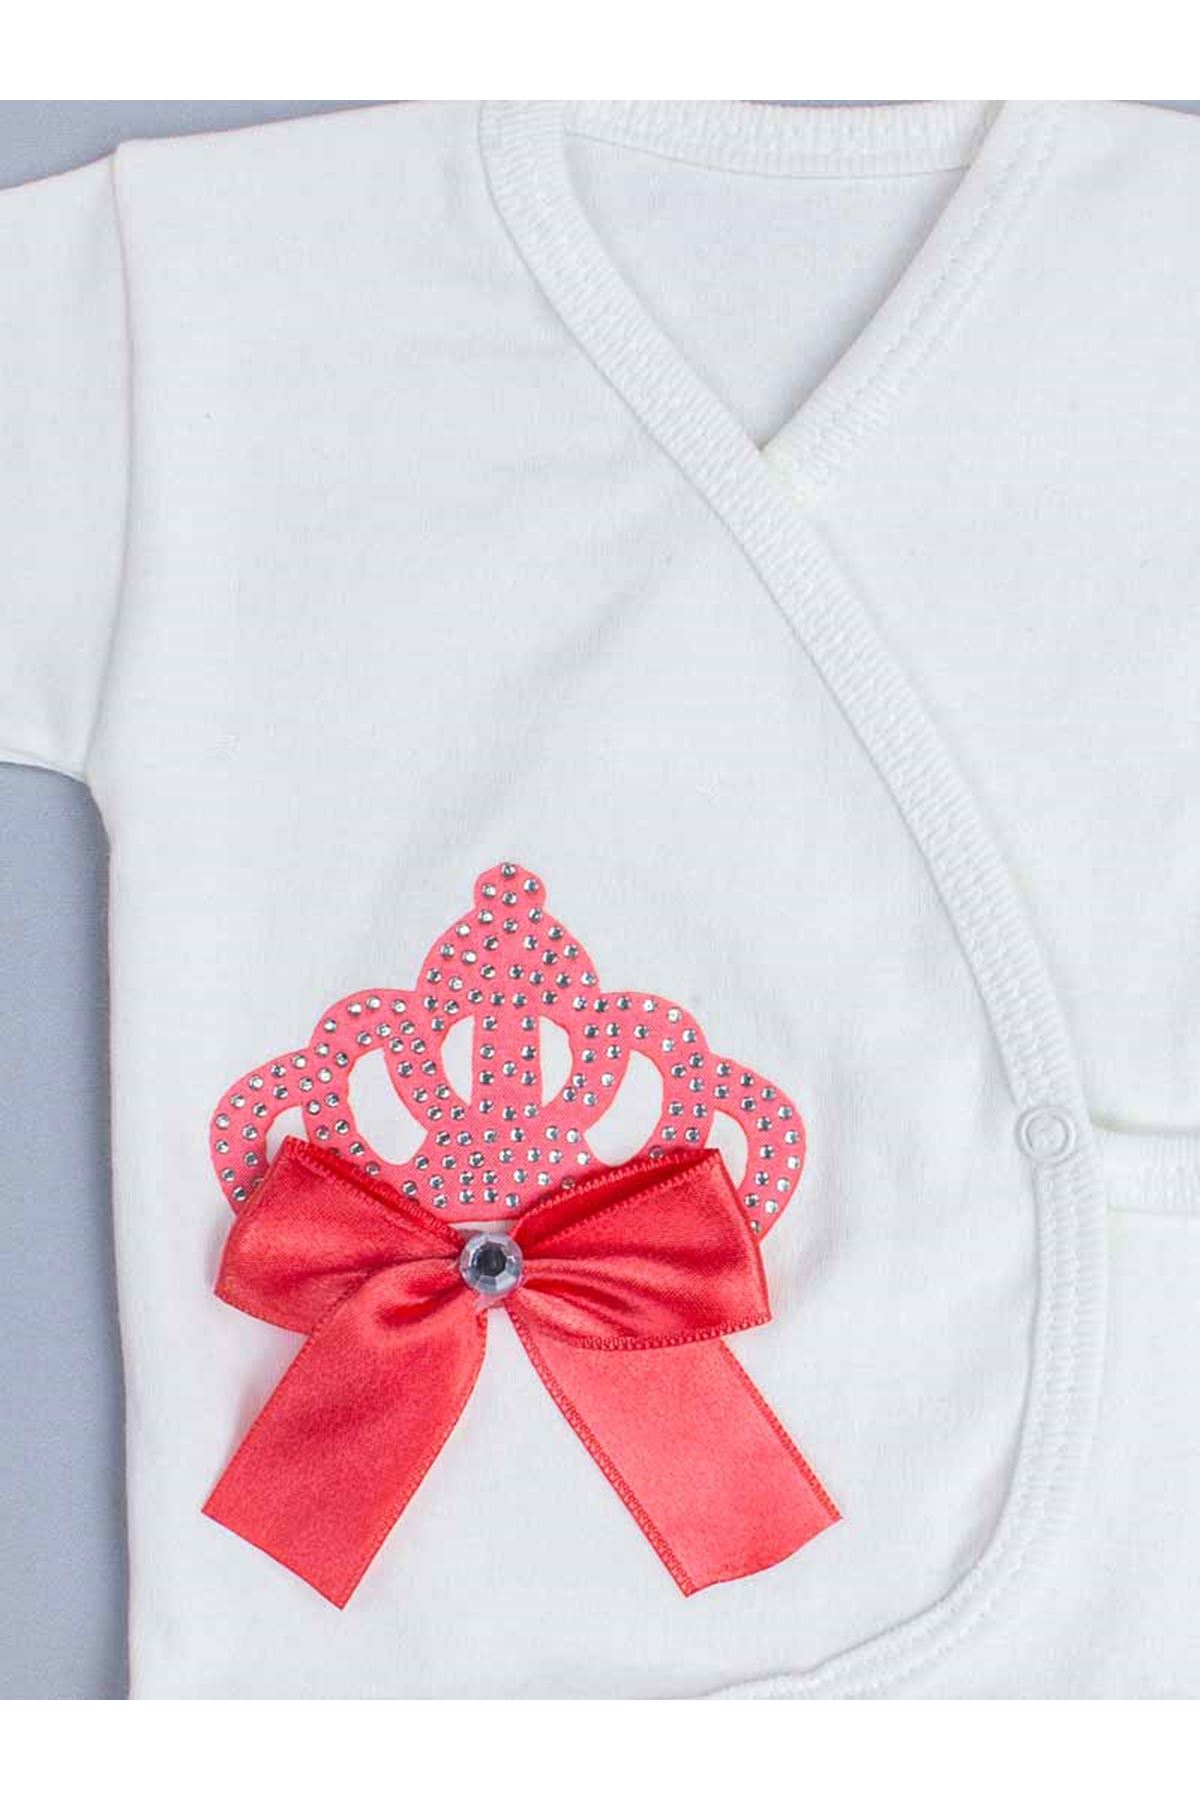 Red Baby Rompers Girl Boy Newborn Clothes 5pcs Set King Queen Clothing Antiallergic Cotton Babies Types Hospital Outlet Types